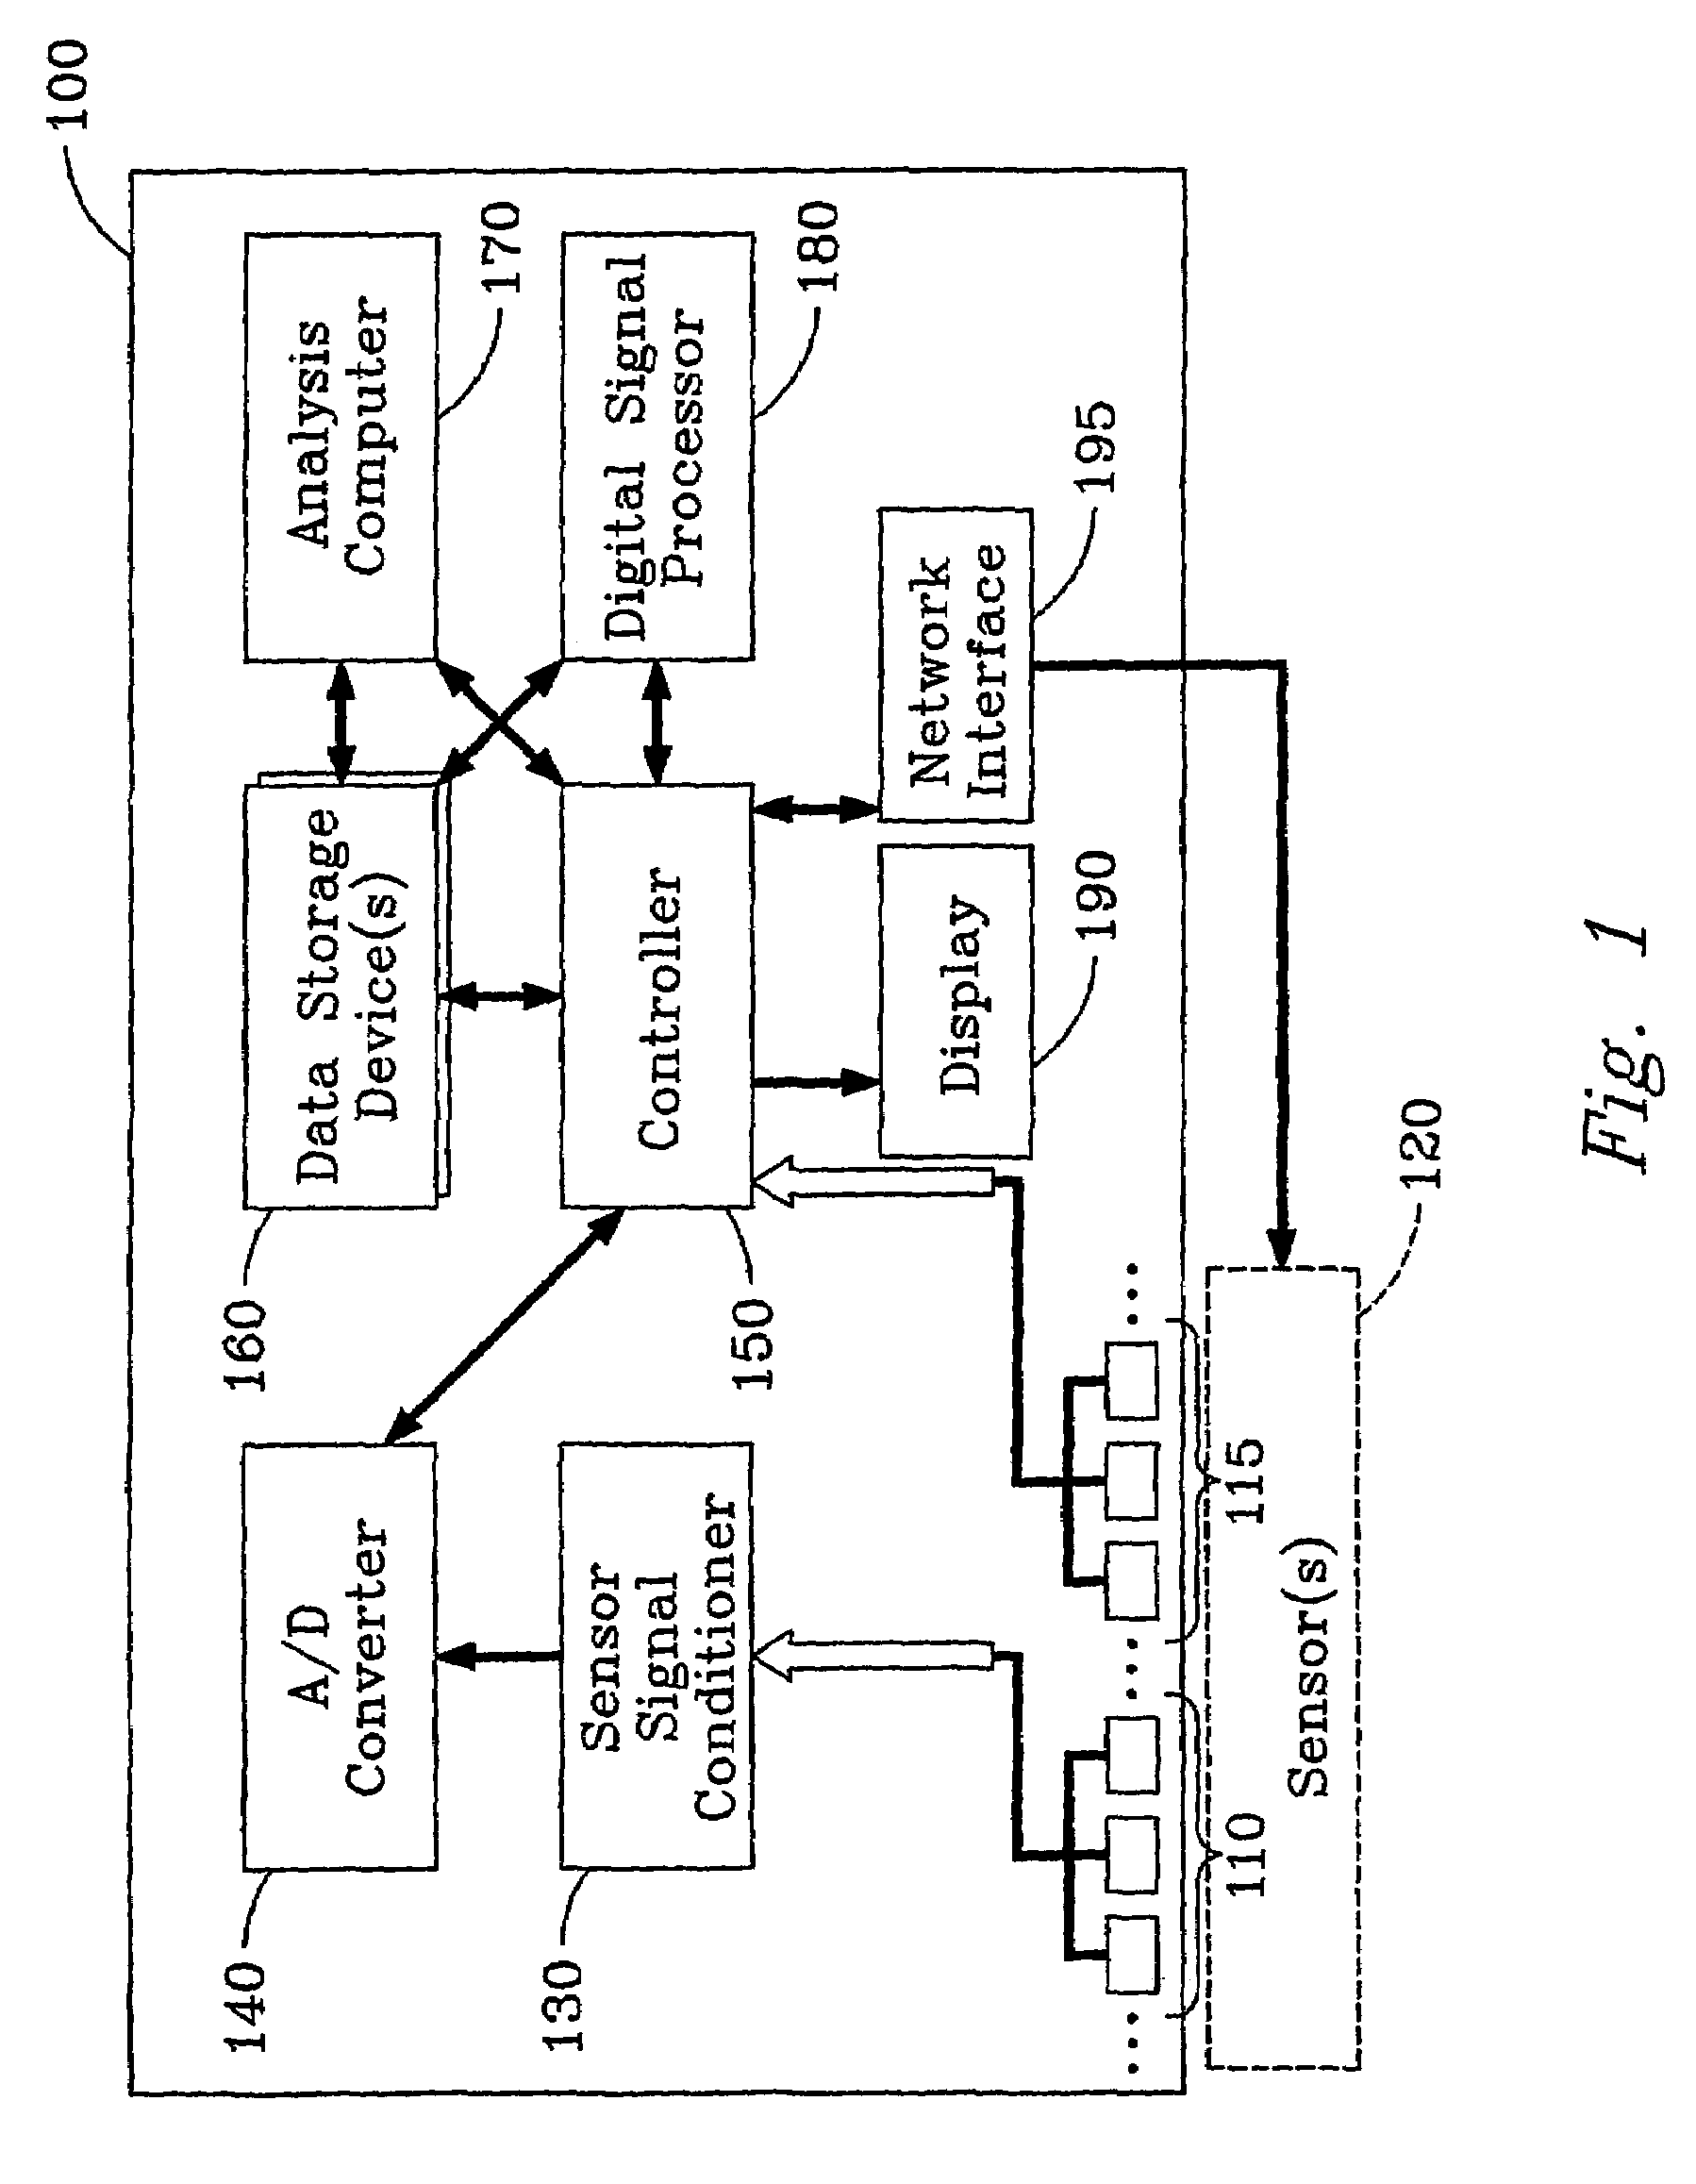 Method and apparatus to predict the remaining service life of an operating system